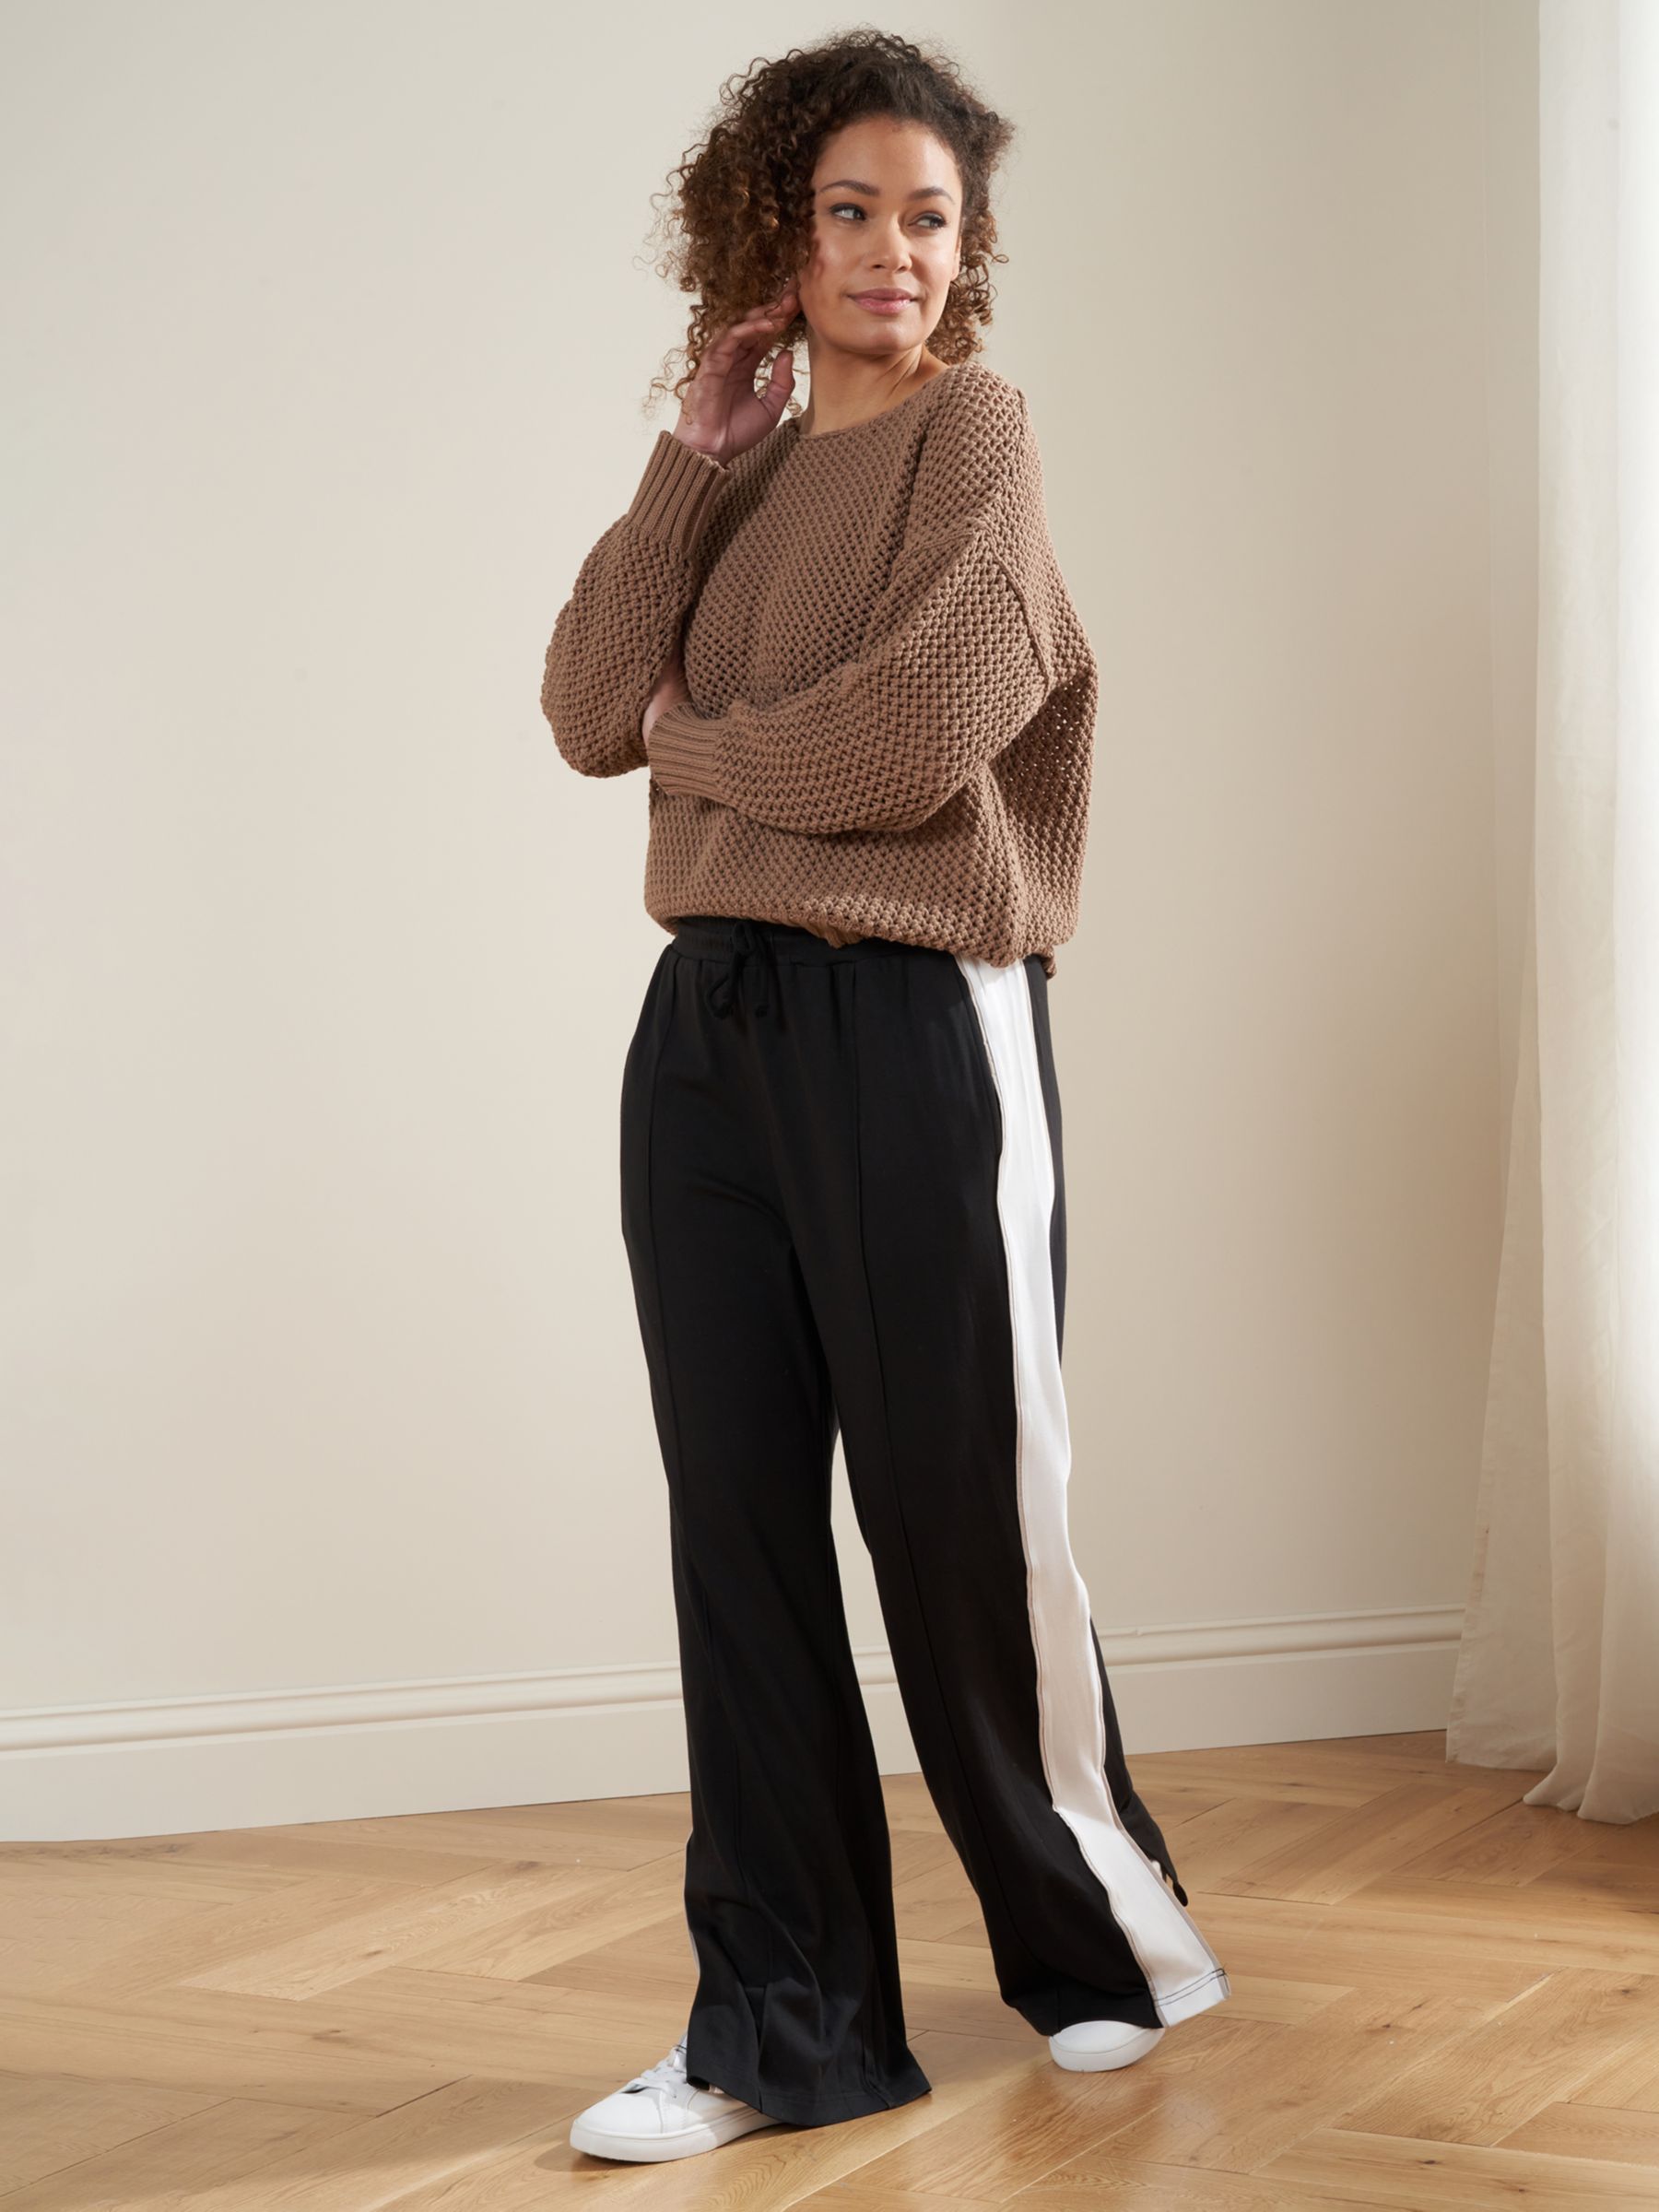 Buy Truly Mesh Open Knit Jumper Online at johnlewis.com